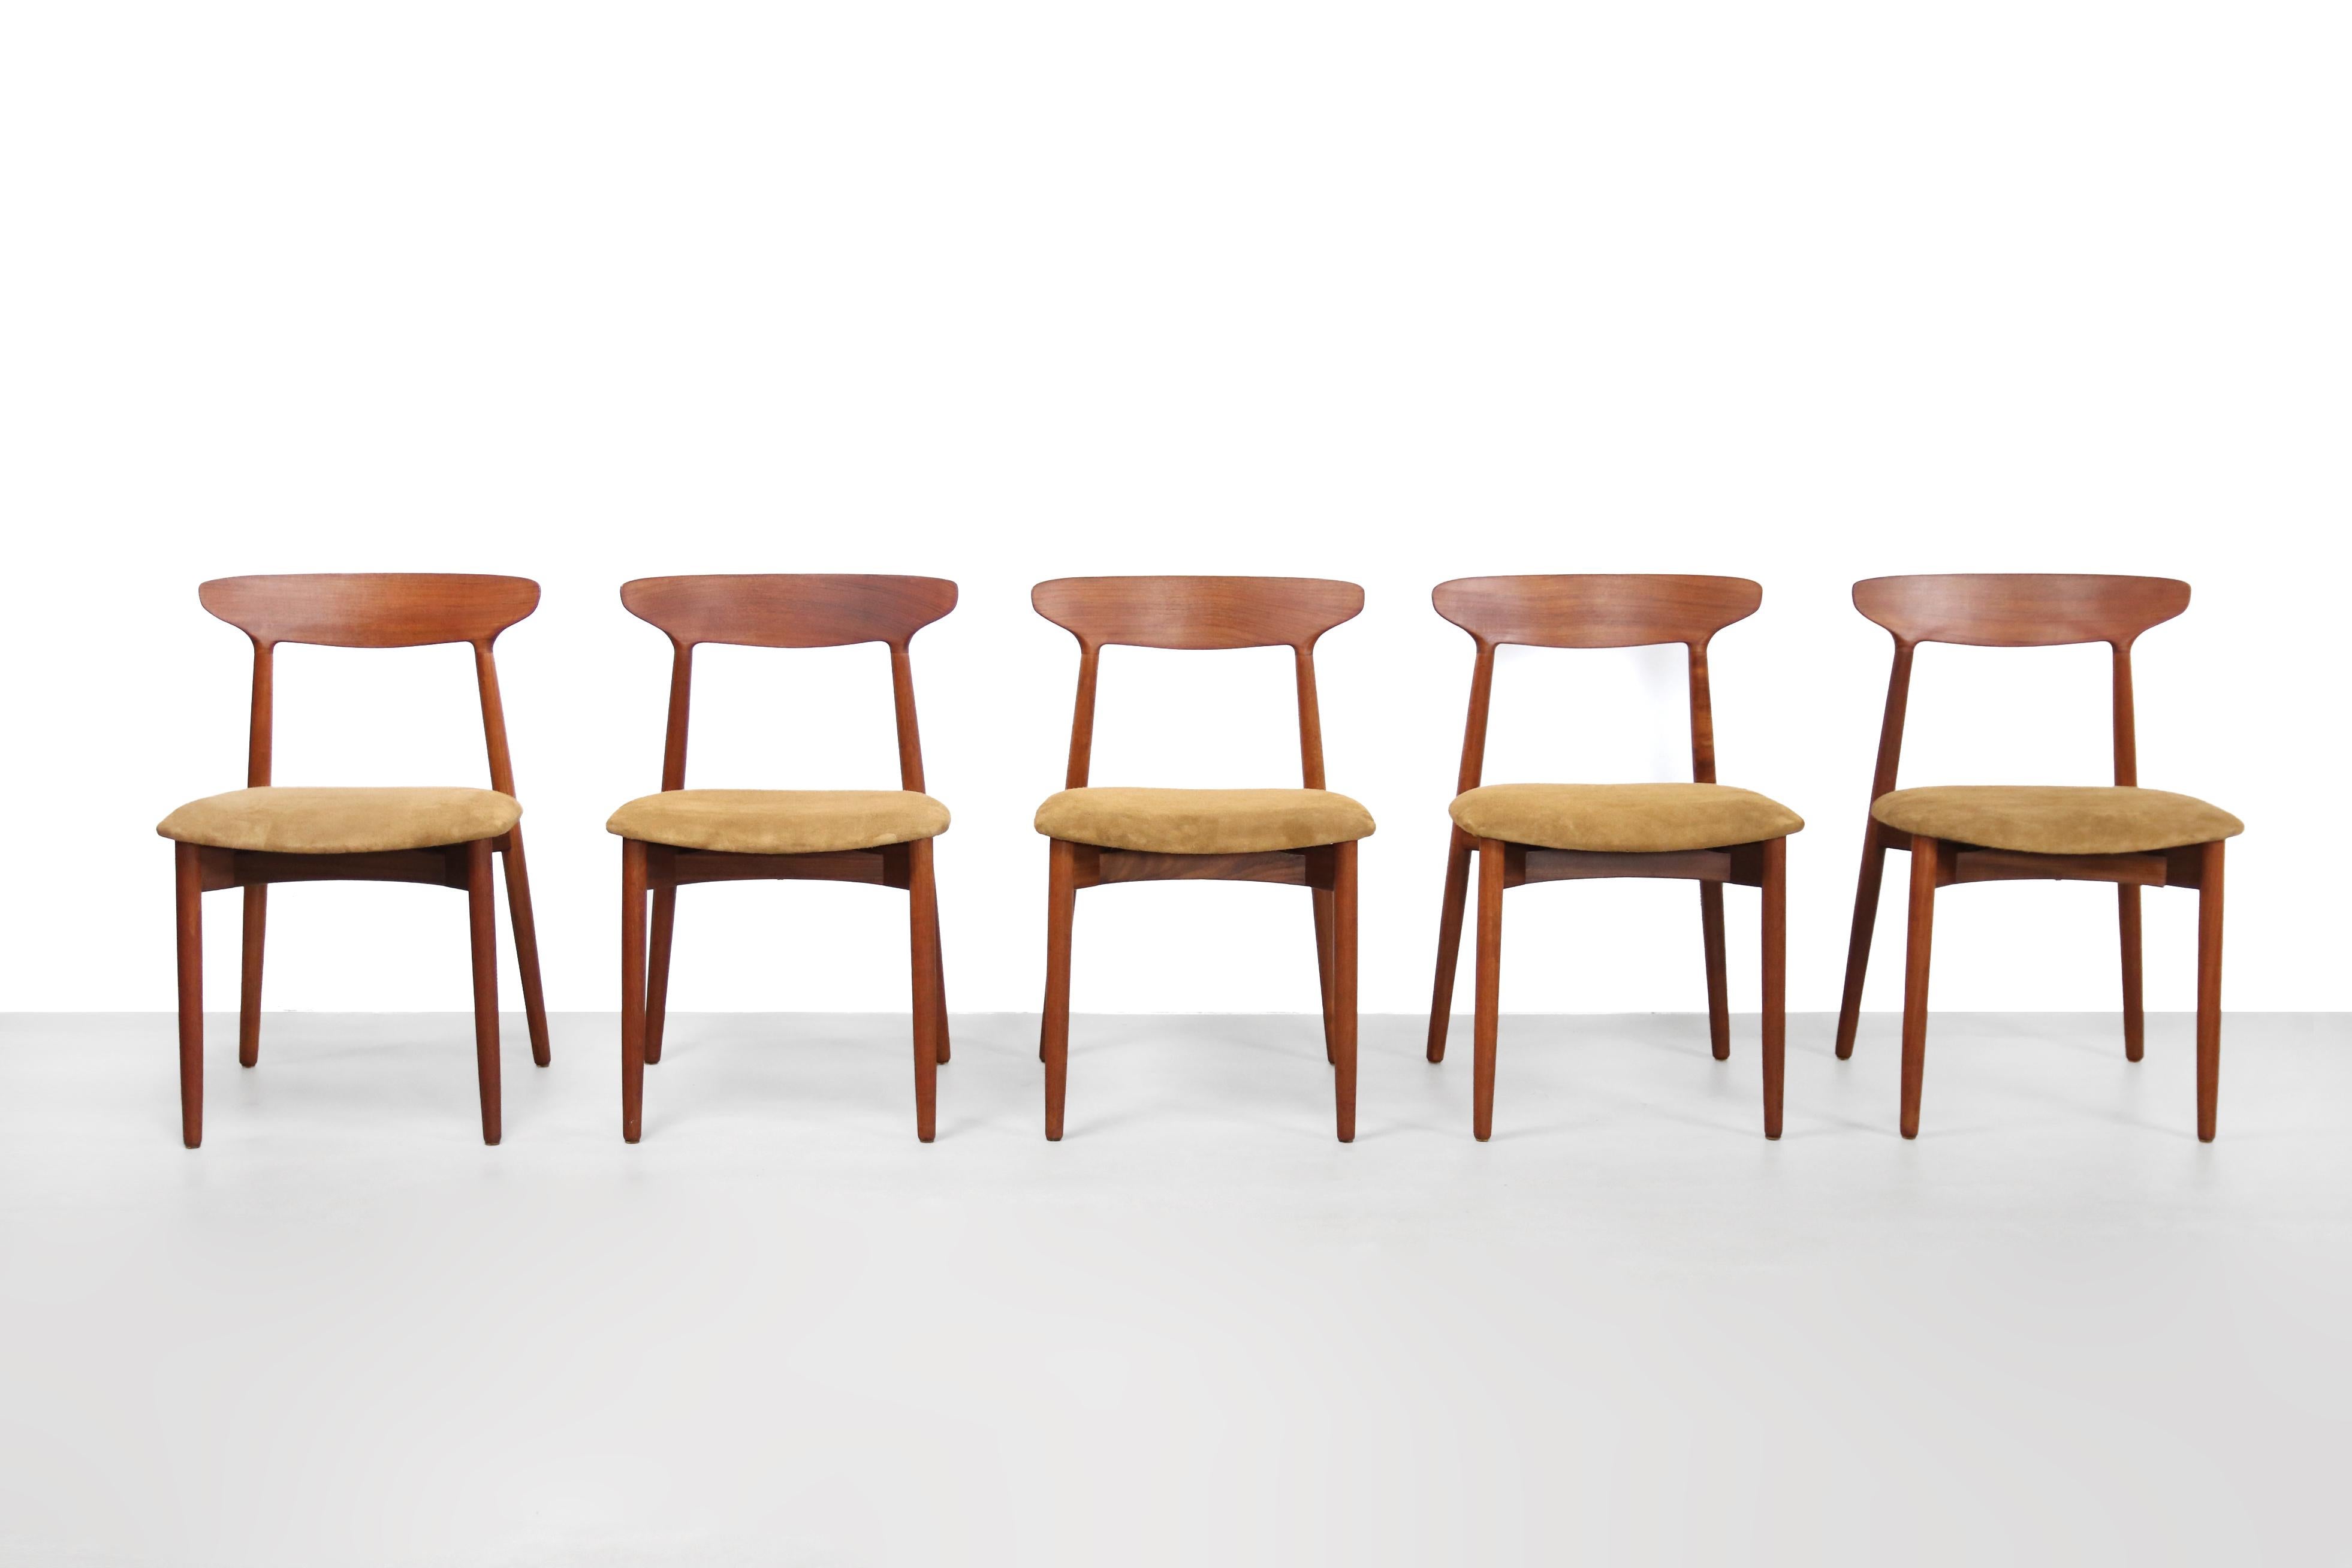 Nice set of five Danish designer: Harry Ostergaard dining chairs produced by Randers Mobelfabrik in Denmark in the late 1950s. These uncommon chairs are made of solid teak wood with beautiful traditional wood connections. These chairs are of high